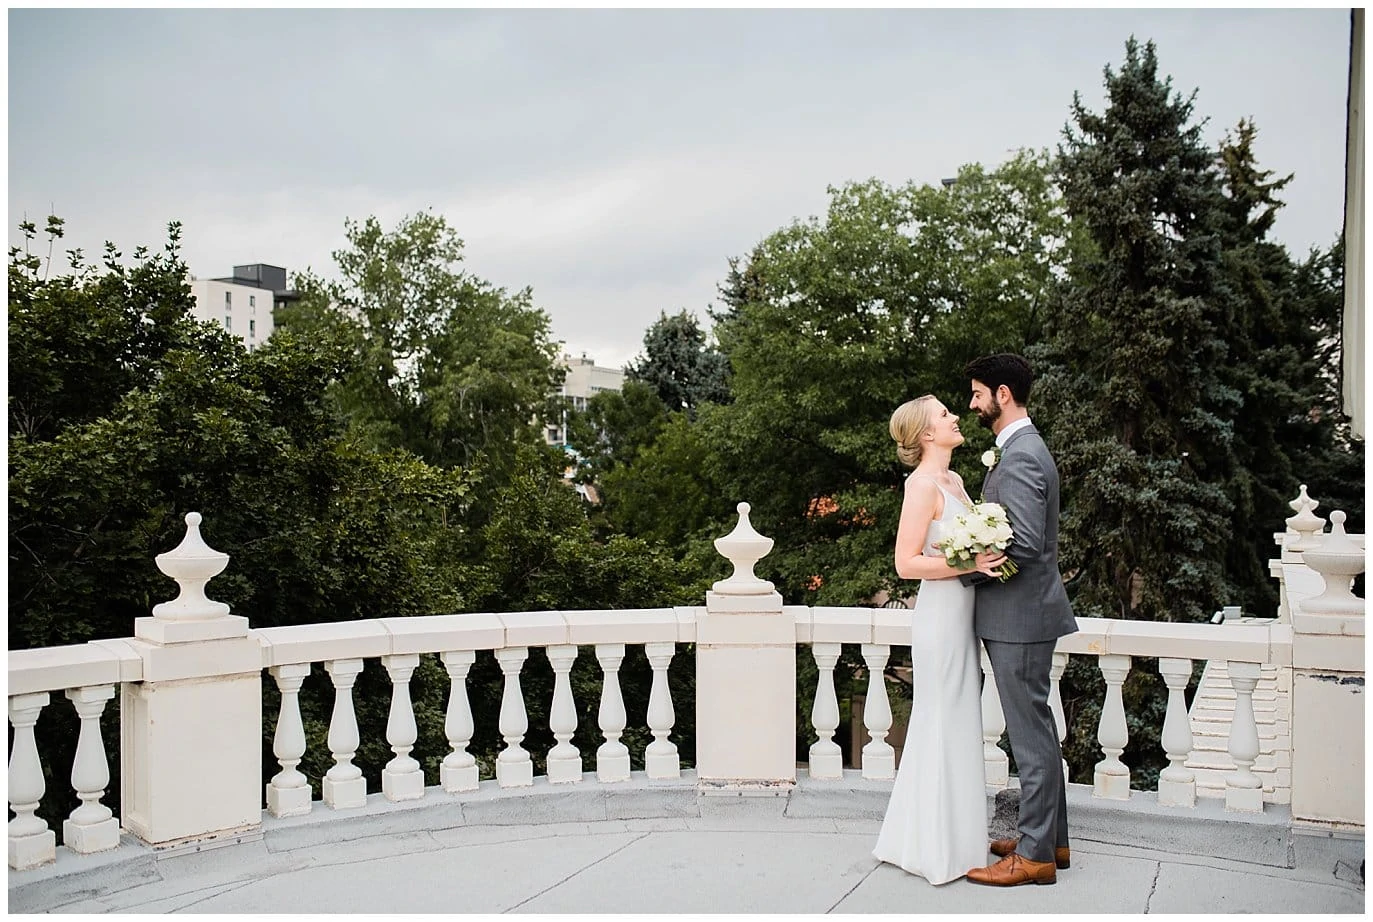 bride and groom romantic wedding portrait at grant humphrey's mansion by Colorado Gay wedding photographer jennie crate photographer